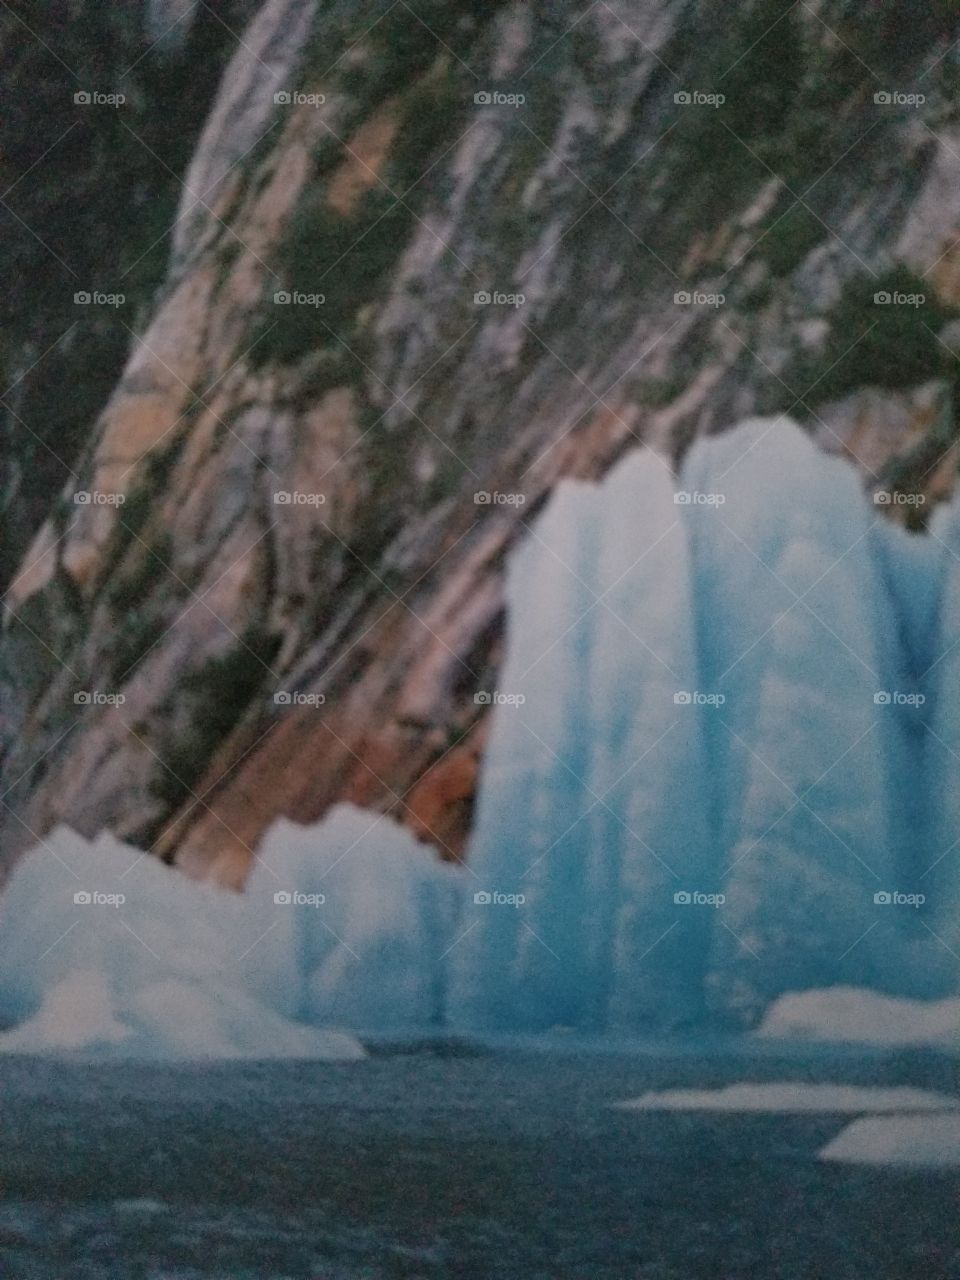 The iceberg is the main subject, but a sense of scale is lost in the balanced proportion. I composed tightly so the iceberg looms in the frame.